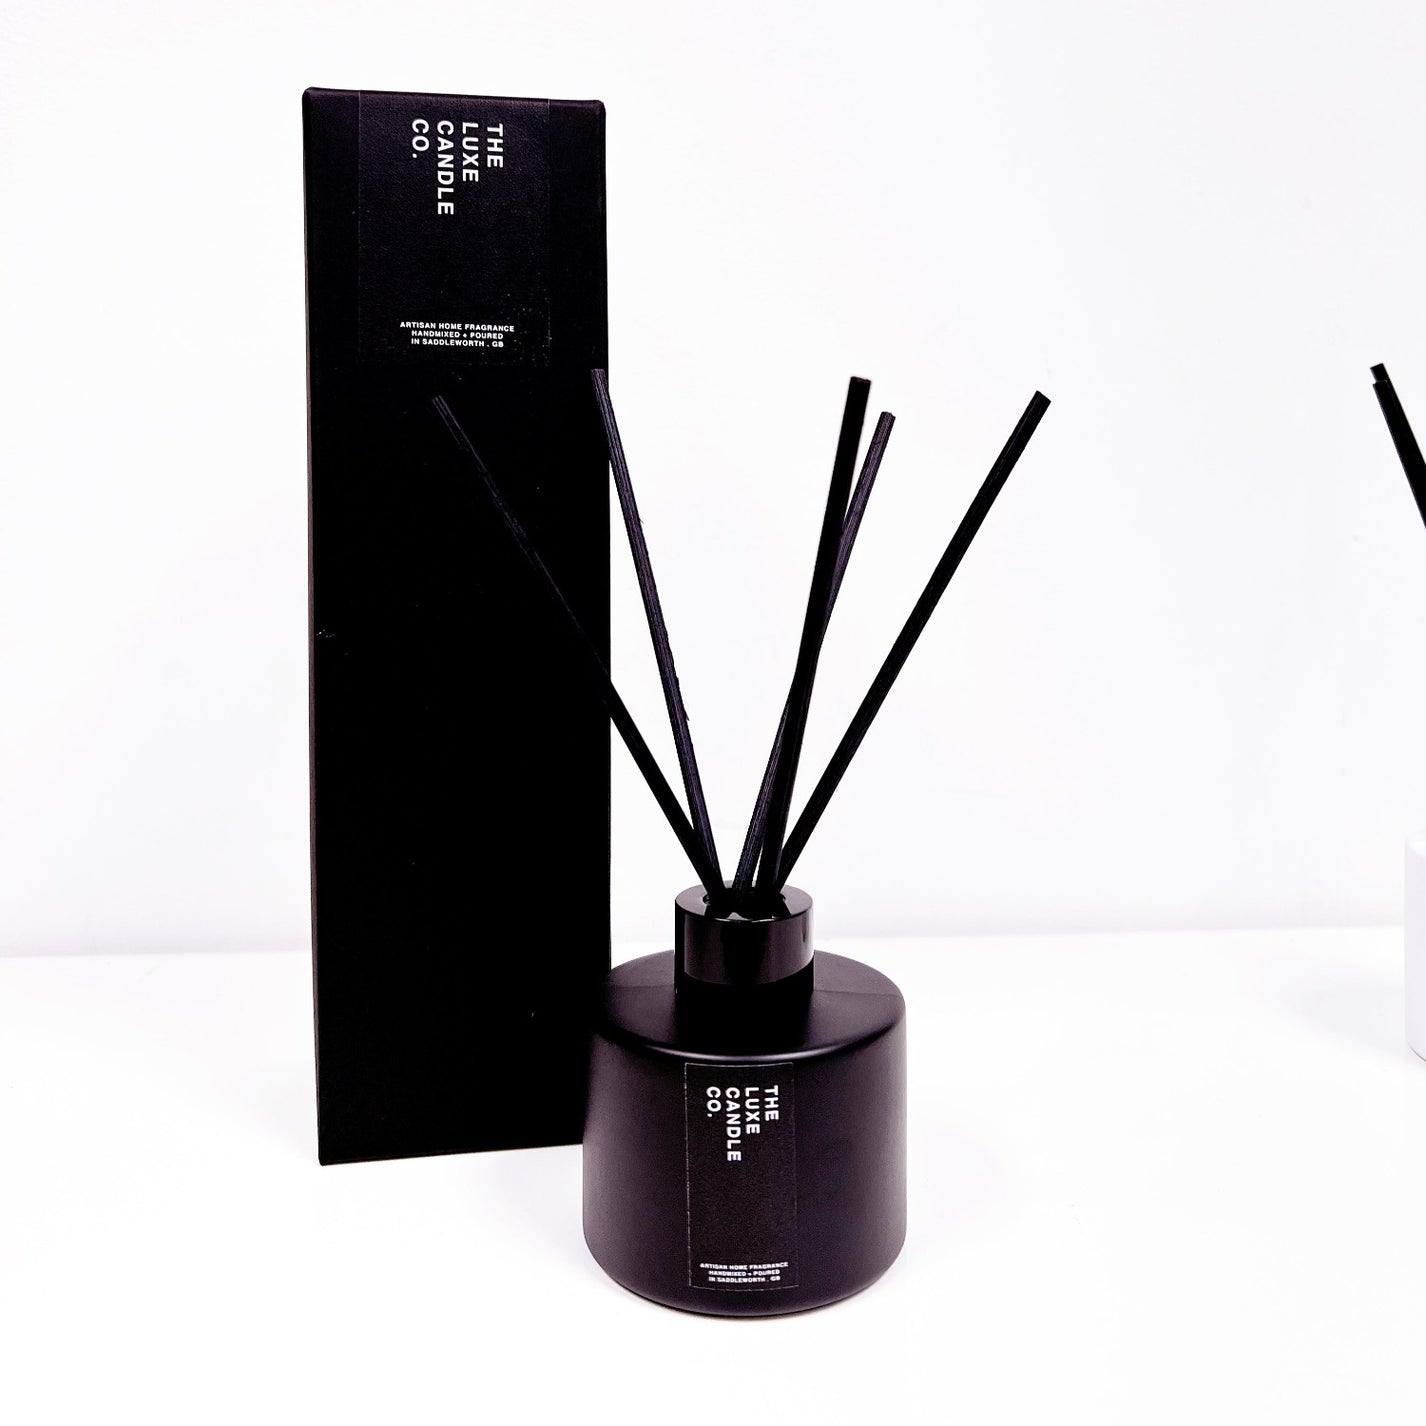 Oud and Rose reed diffuser gift set with white reed diffuser | Best gift idea for oud lover UK